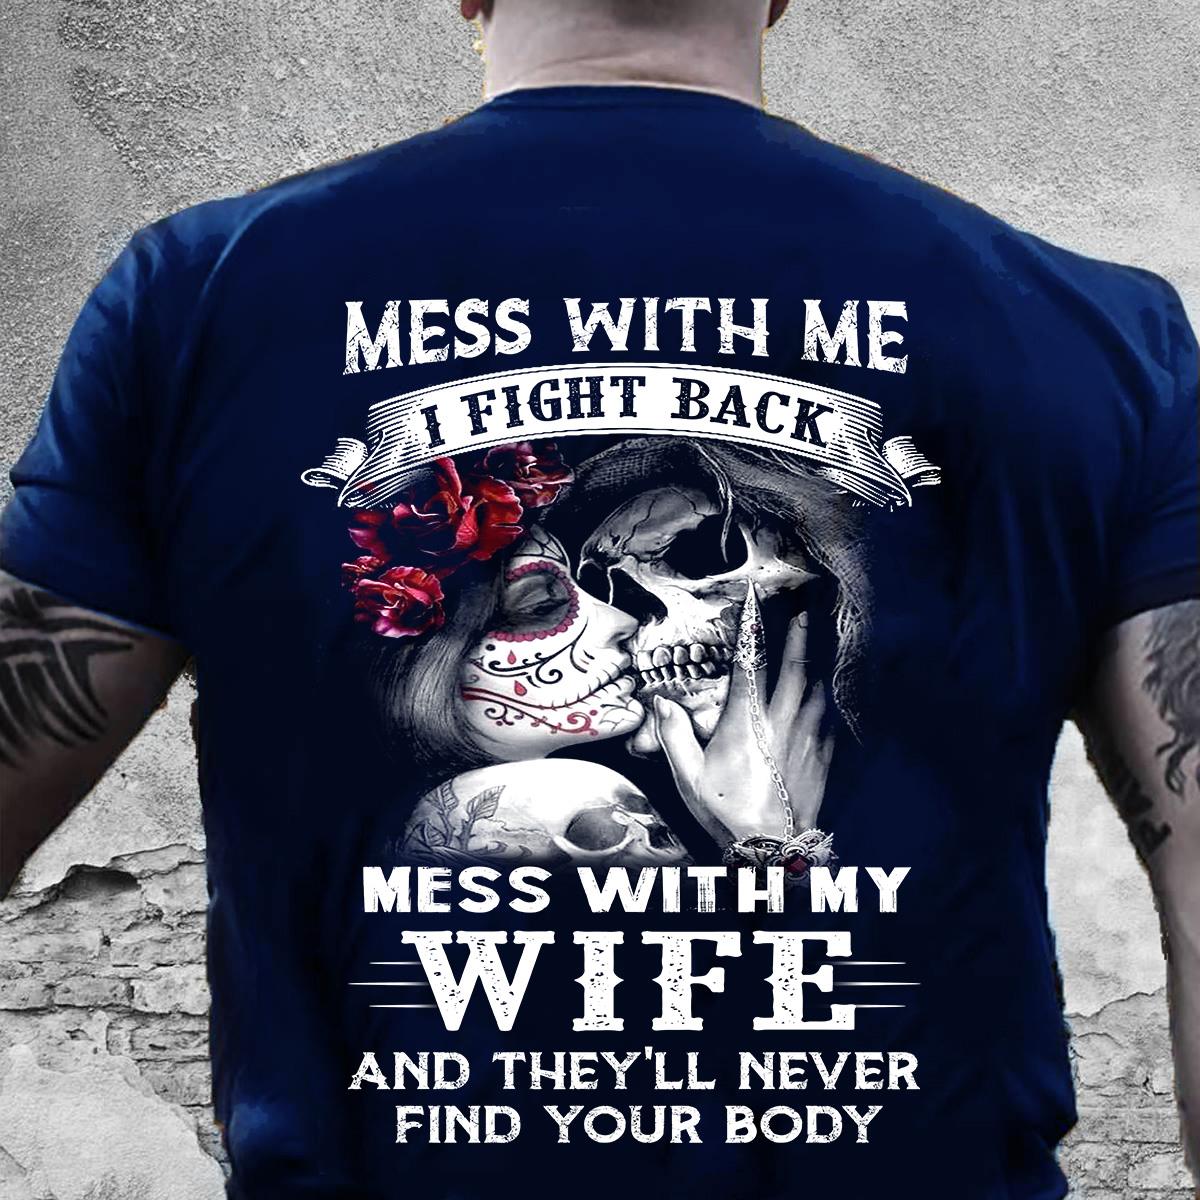 Mess with me I fight back mess with my wife and they'll never find your body